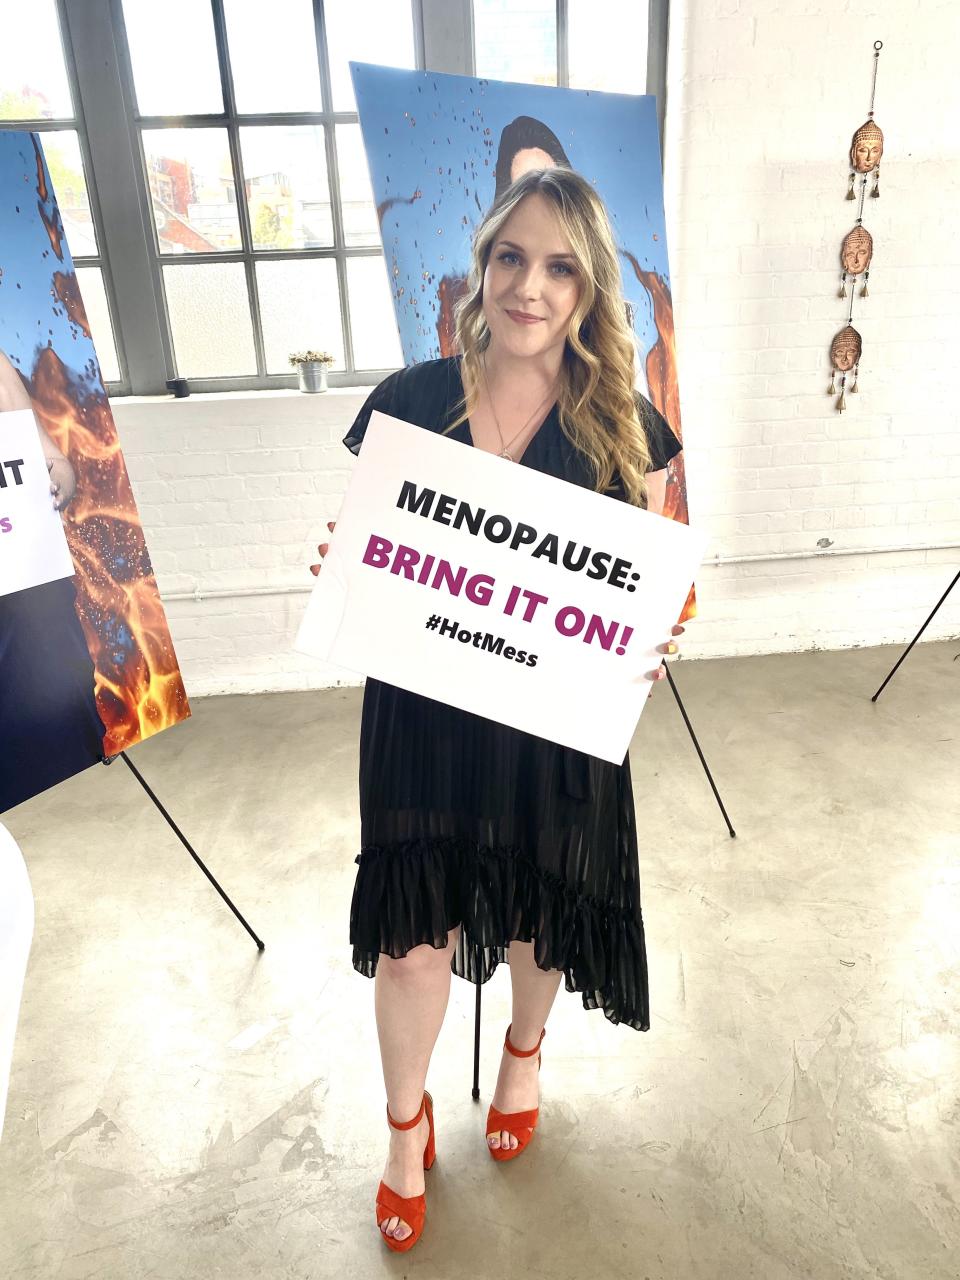 Jess Moore says early menopause affected her so deeply, she is now on a mission to help other women. Jess holding: Menopause: Bring It On! sign. (Supplied)